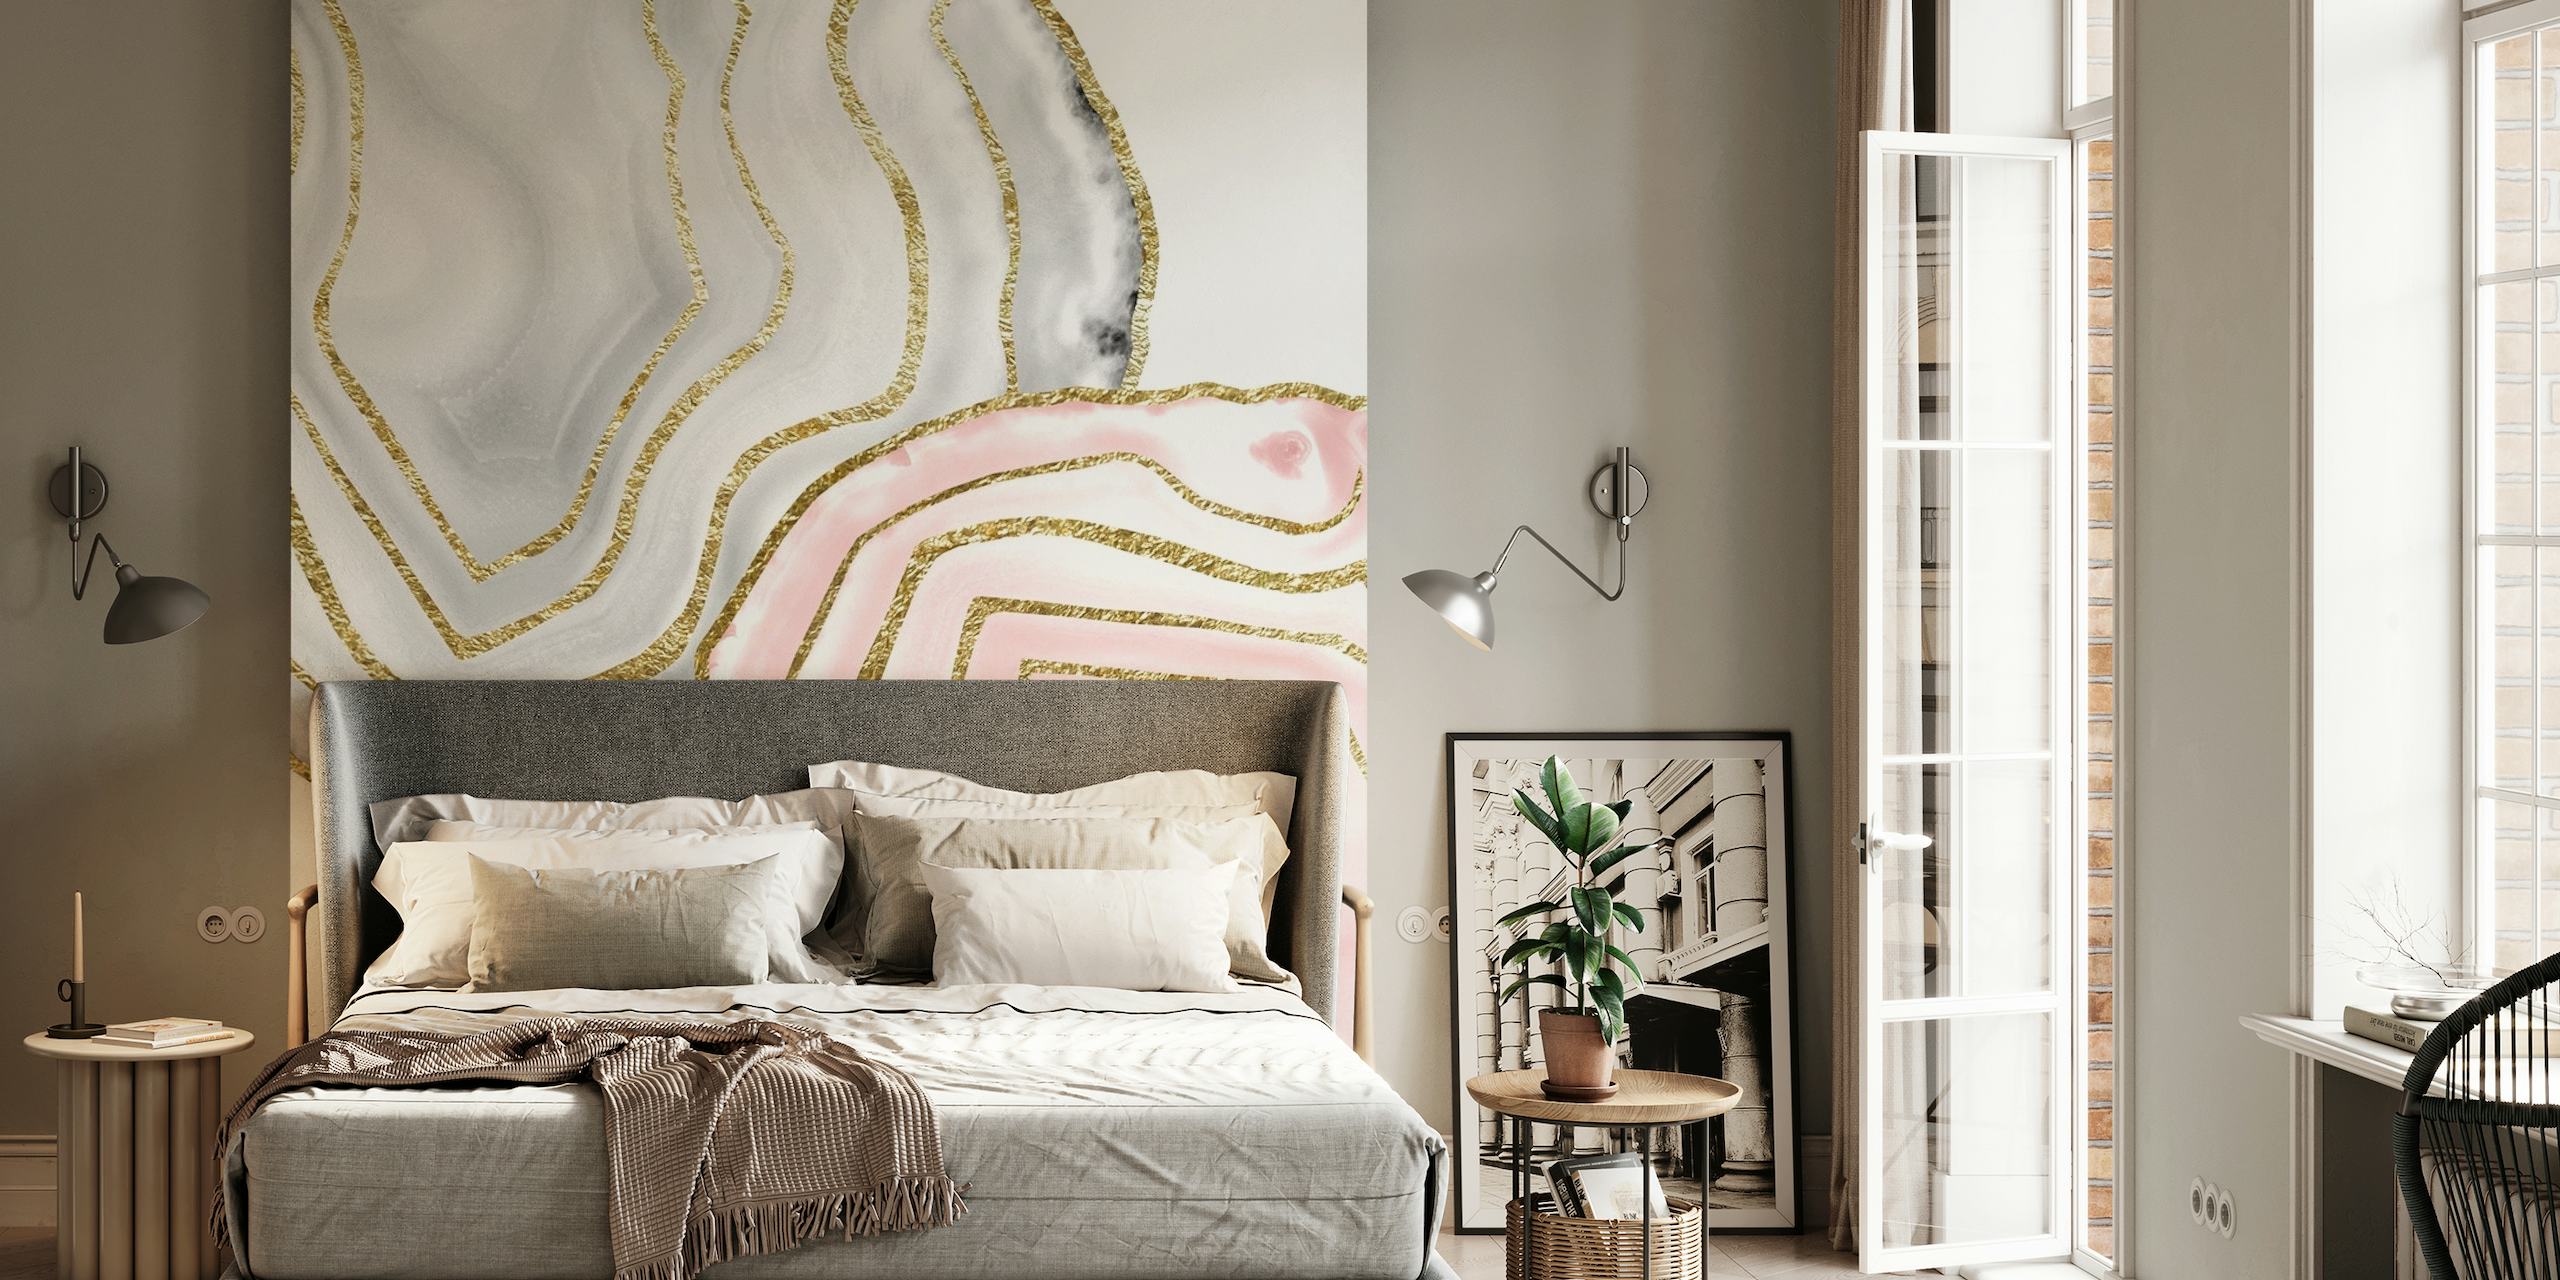 Yin Yang Agate wall mural with pink and gray colors and gold accents